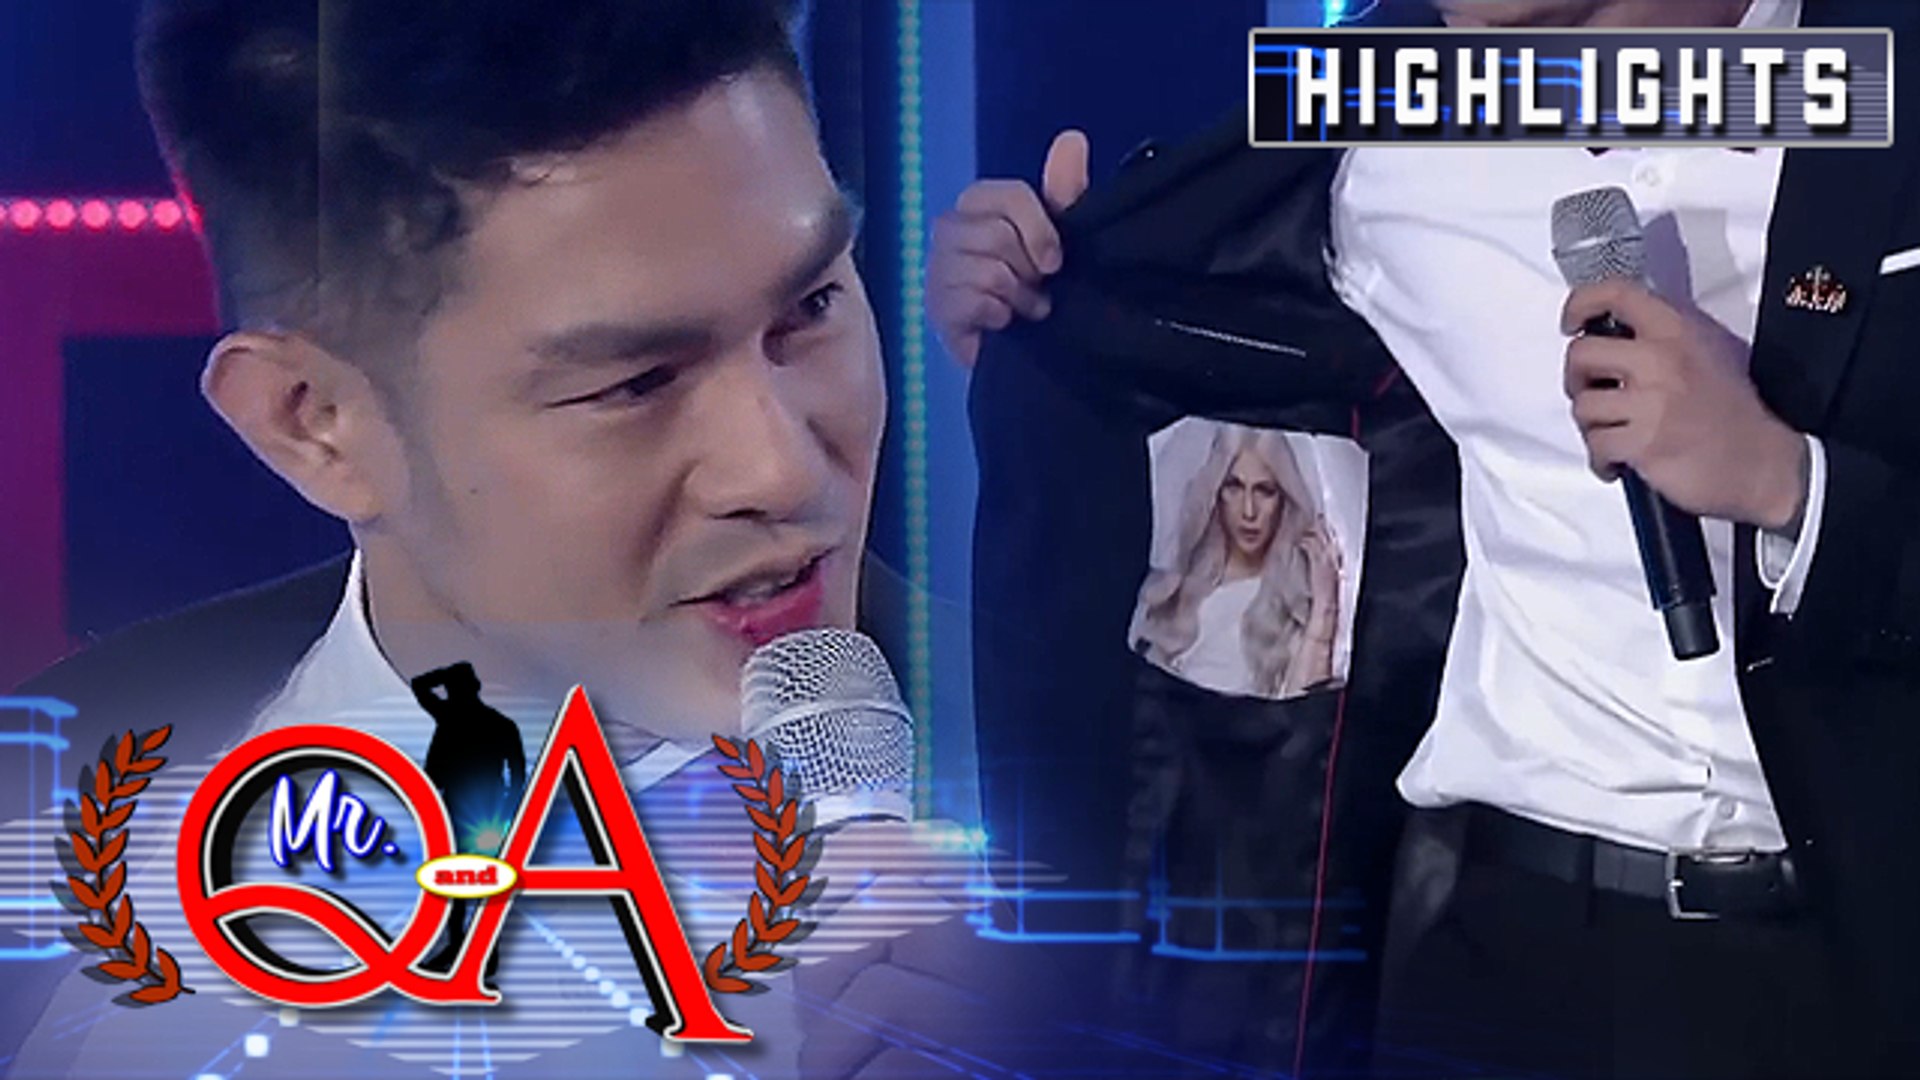 Ion shows off his customized Vice Ganda outfit | It's Showtime Mr Q and A